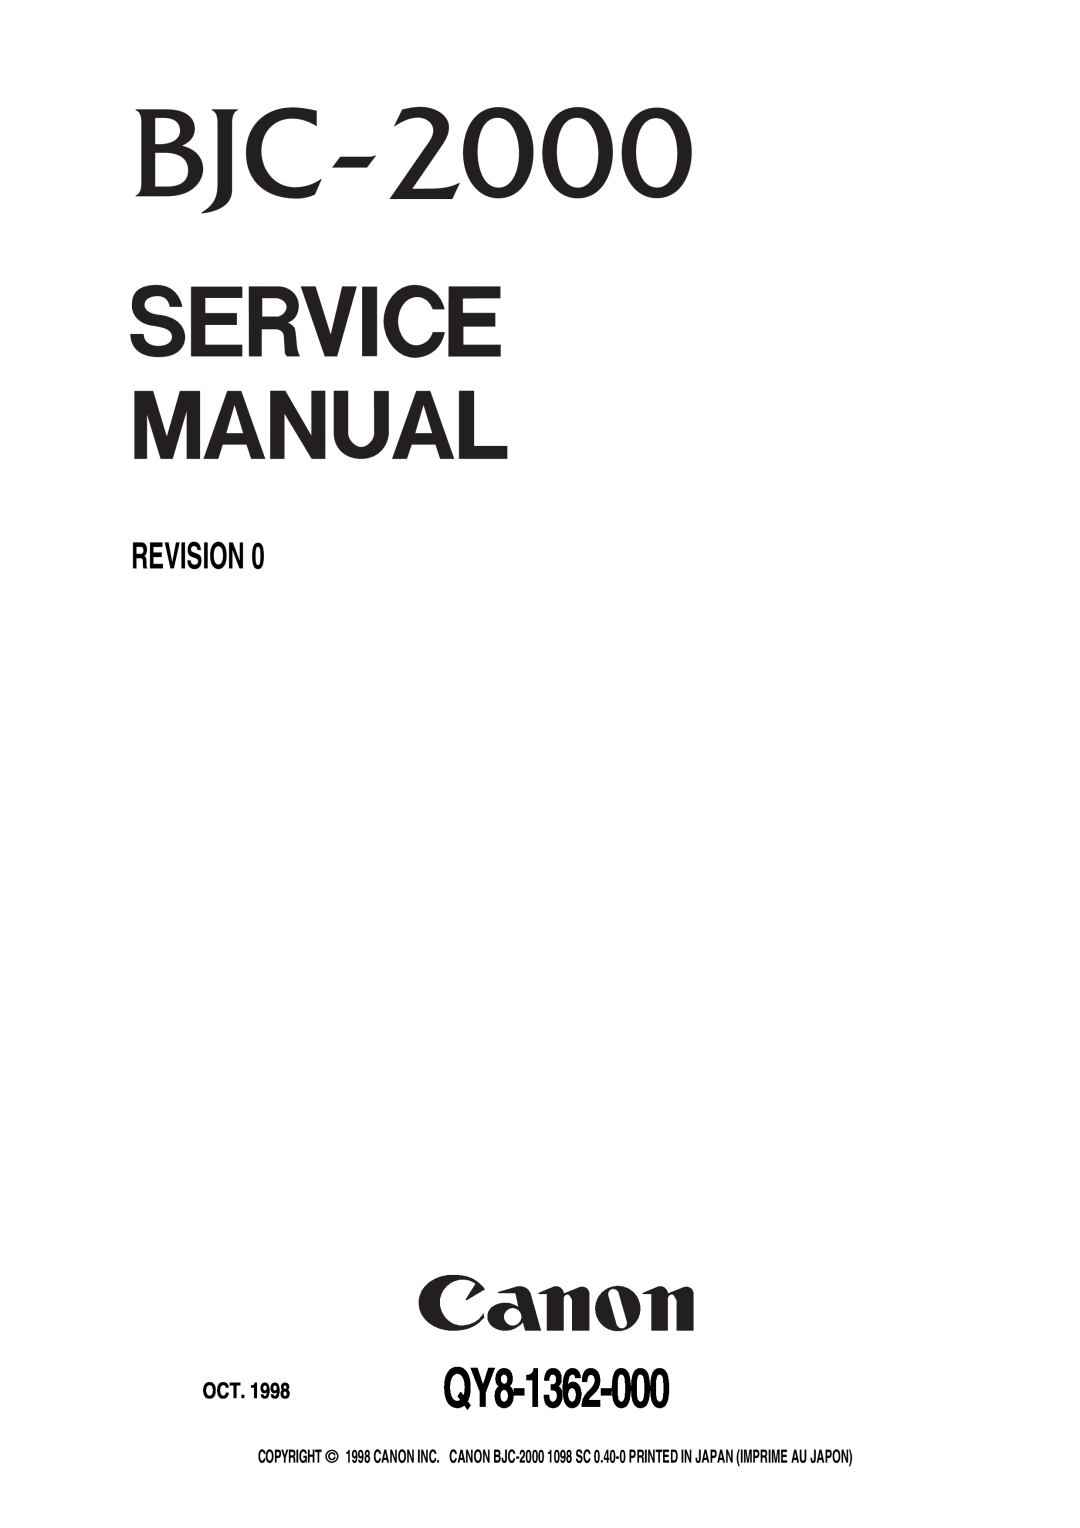 Canon 2000 manual Revision, QY8-1362-000 